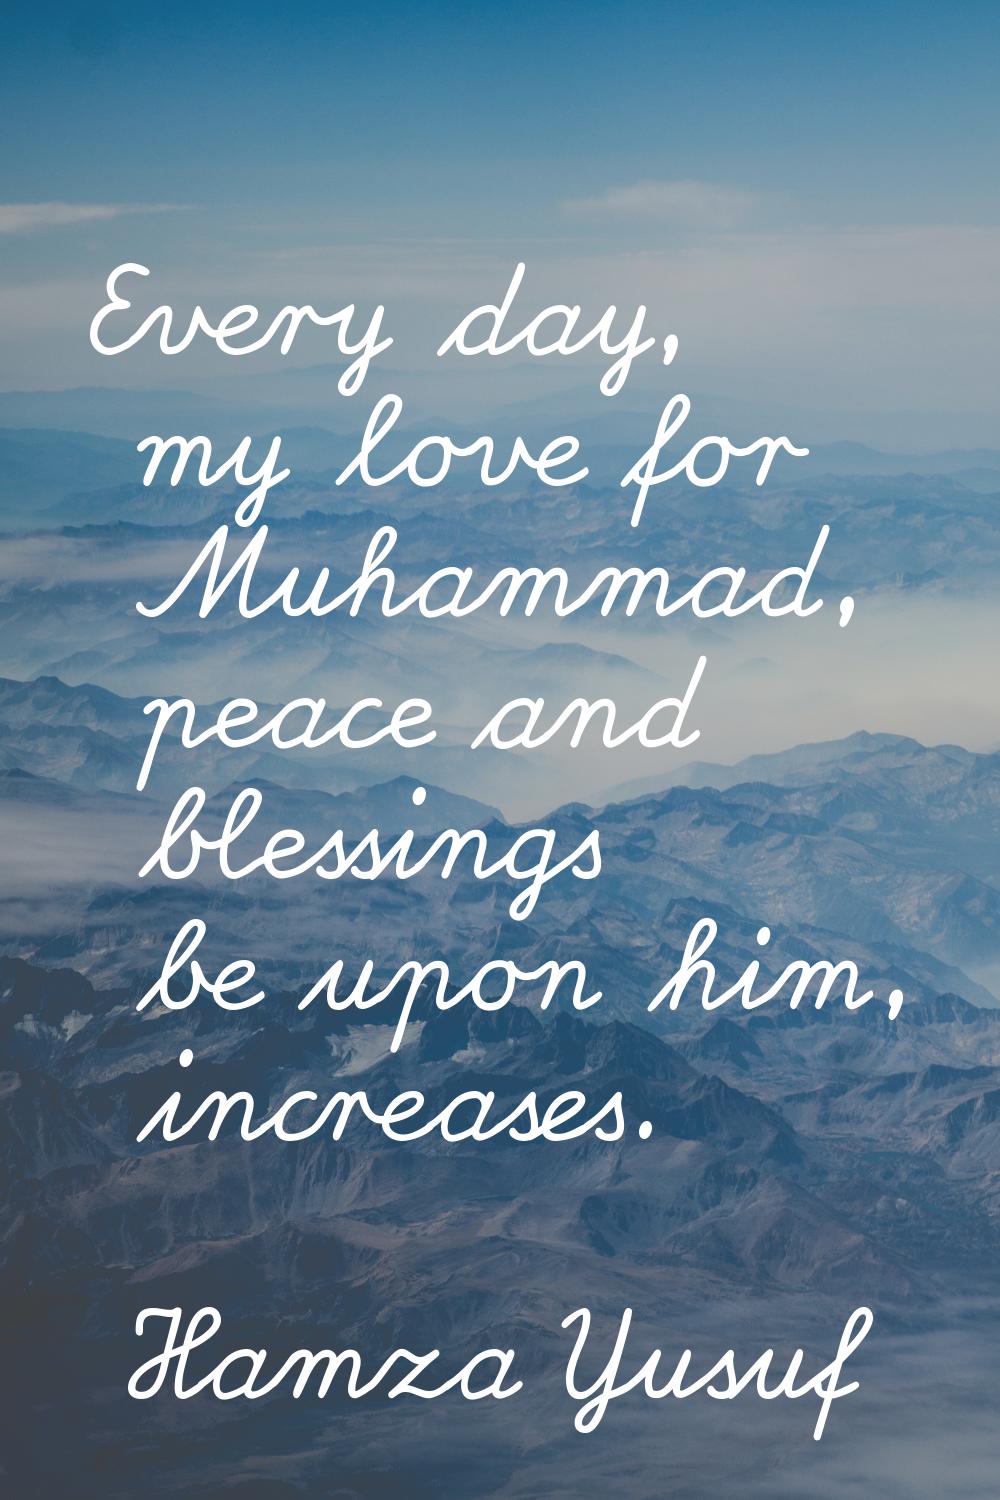 Every day, my love for Muhammad, peace and blessings be upon him, increases.